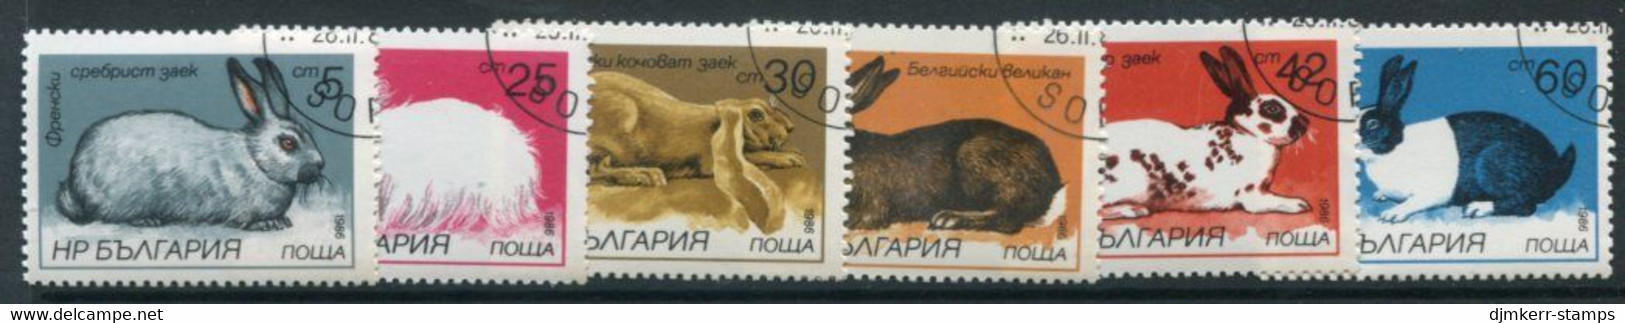 BULGARIA 1986 Rabbits Perforated  Used.  Michel 3447-52A - Used Stamps